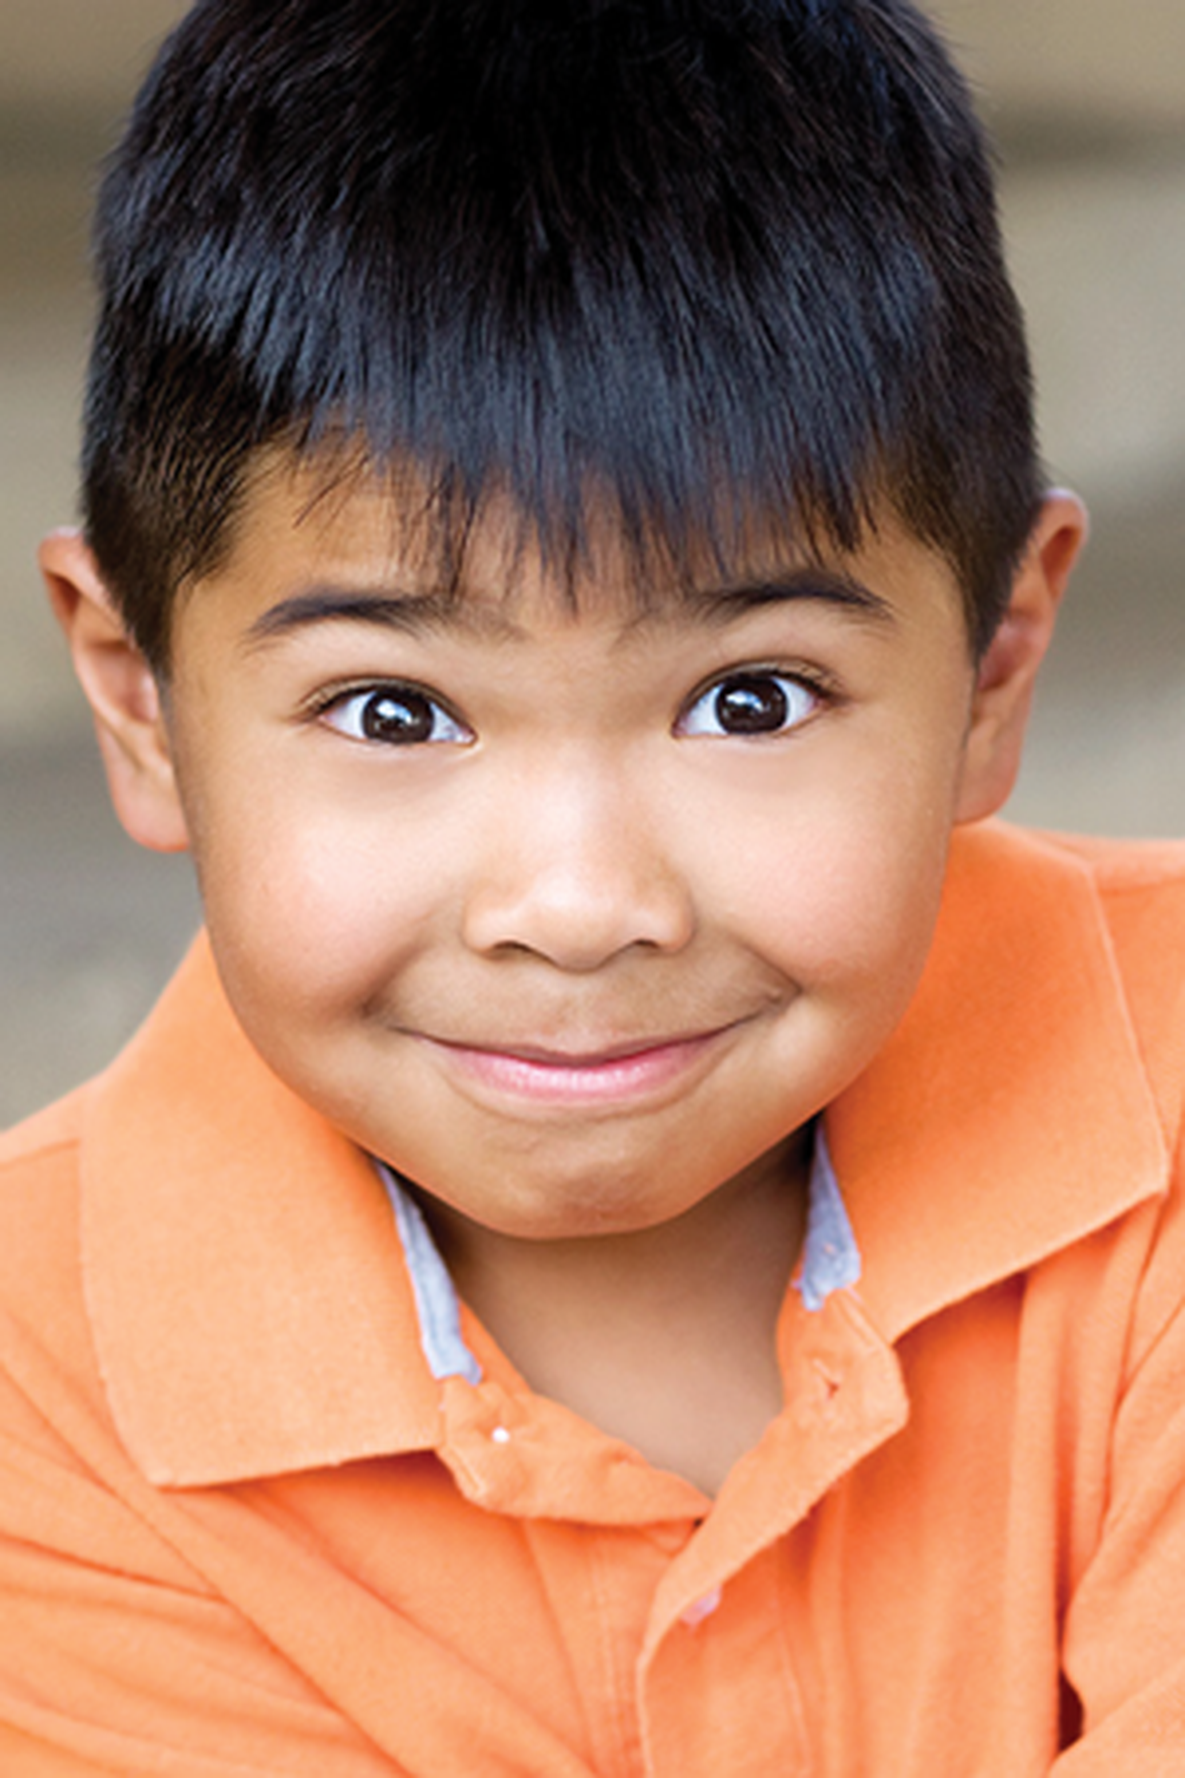 The Child Actor’s Tricks to Taking the Perfect Headshot